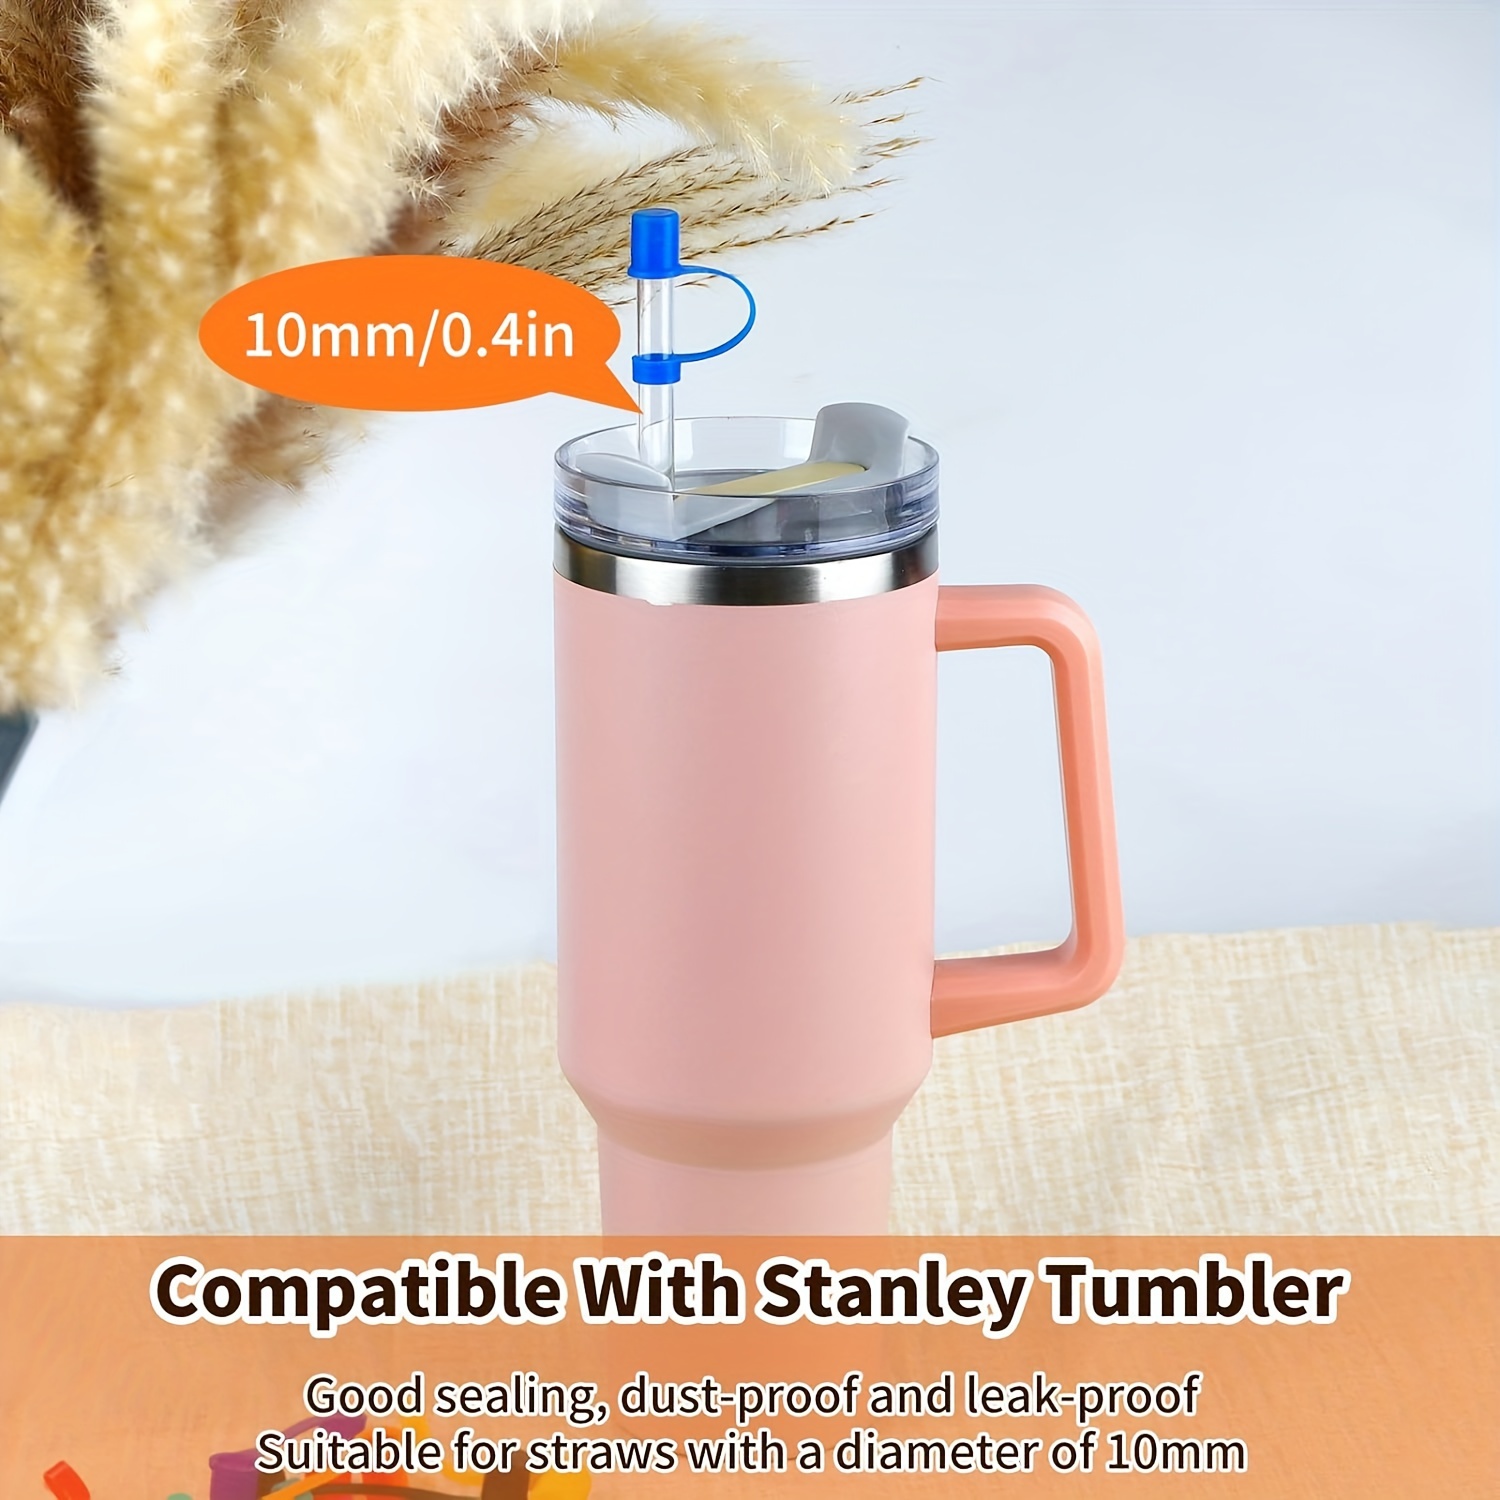 12PCS Silicone Straw Covers Cap Compatible with Stanley 30&40 Oz Cup, 10mm  for Tumblers,Reusable Straws Tips Lids